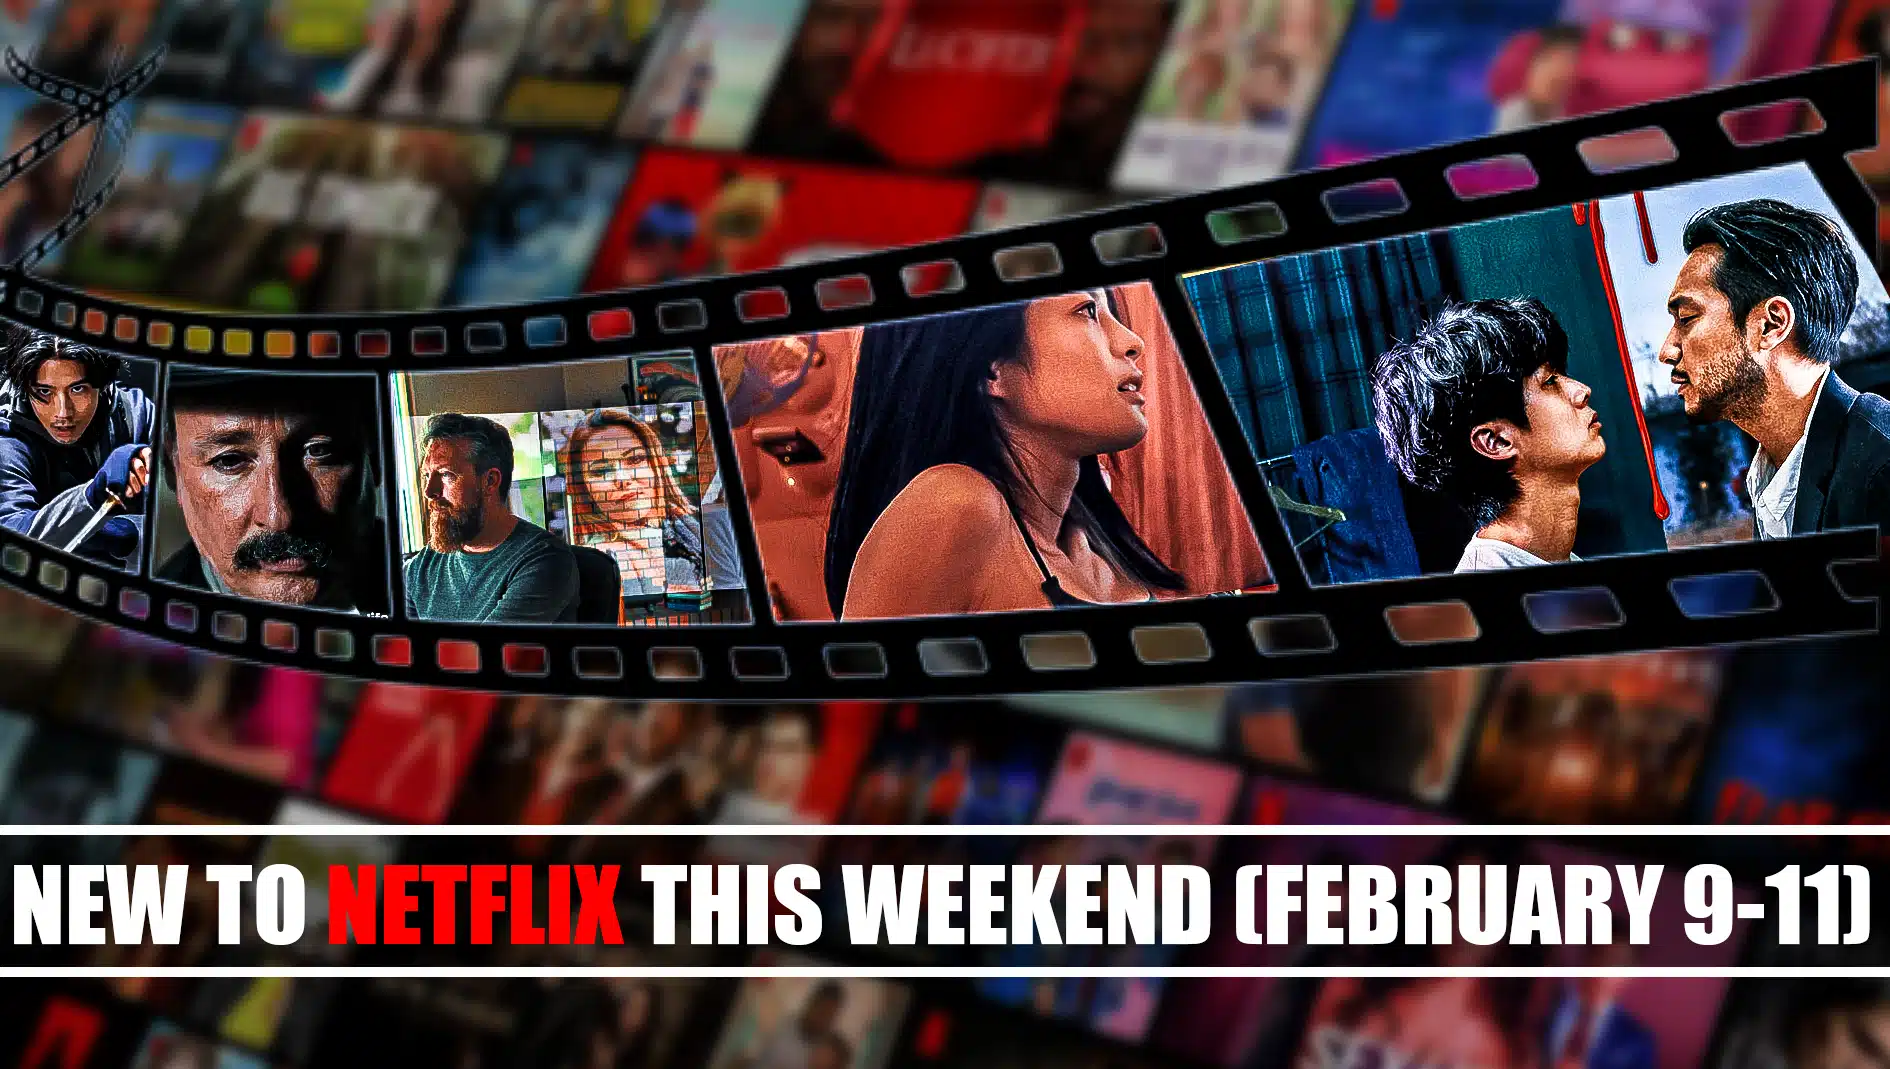 What to watch this weekend from Jan 26 to Jan 28